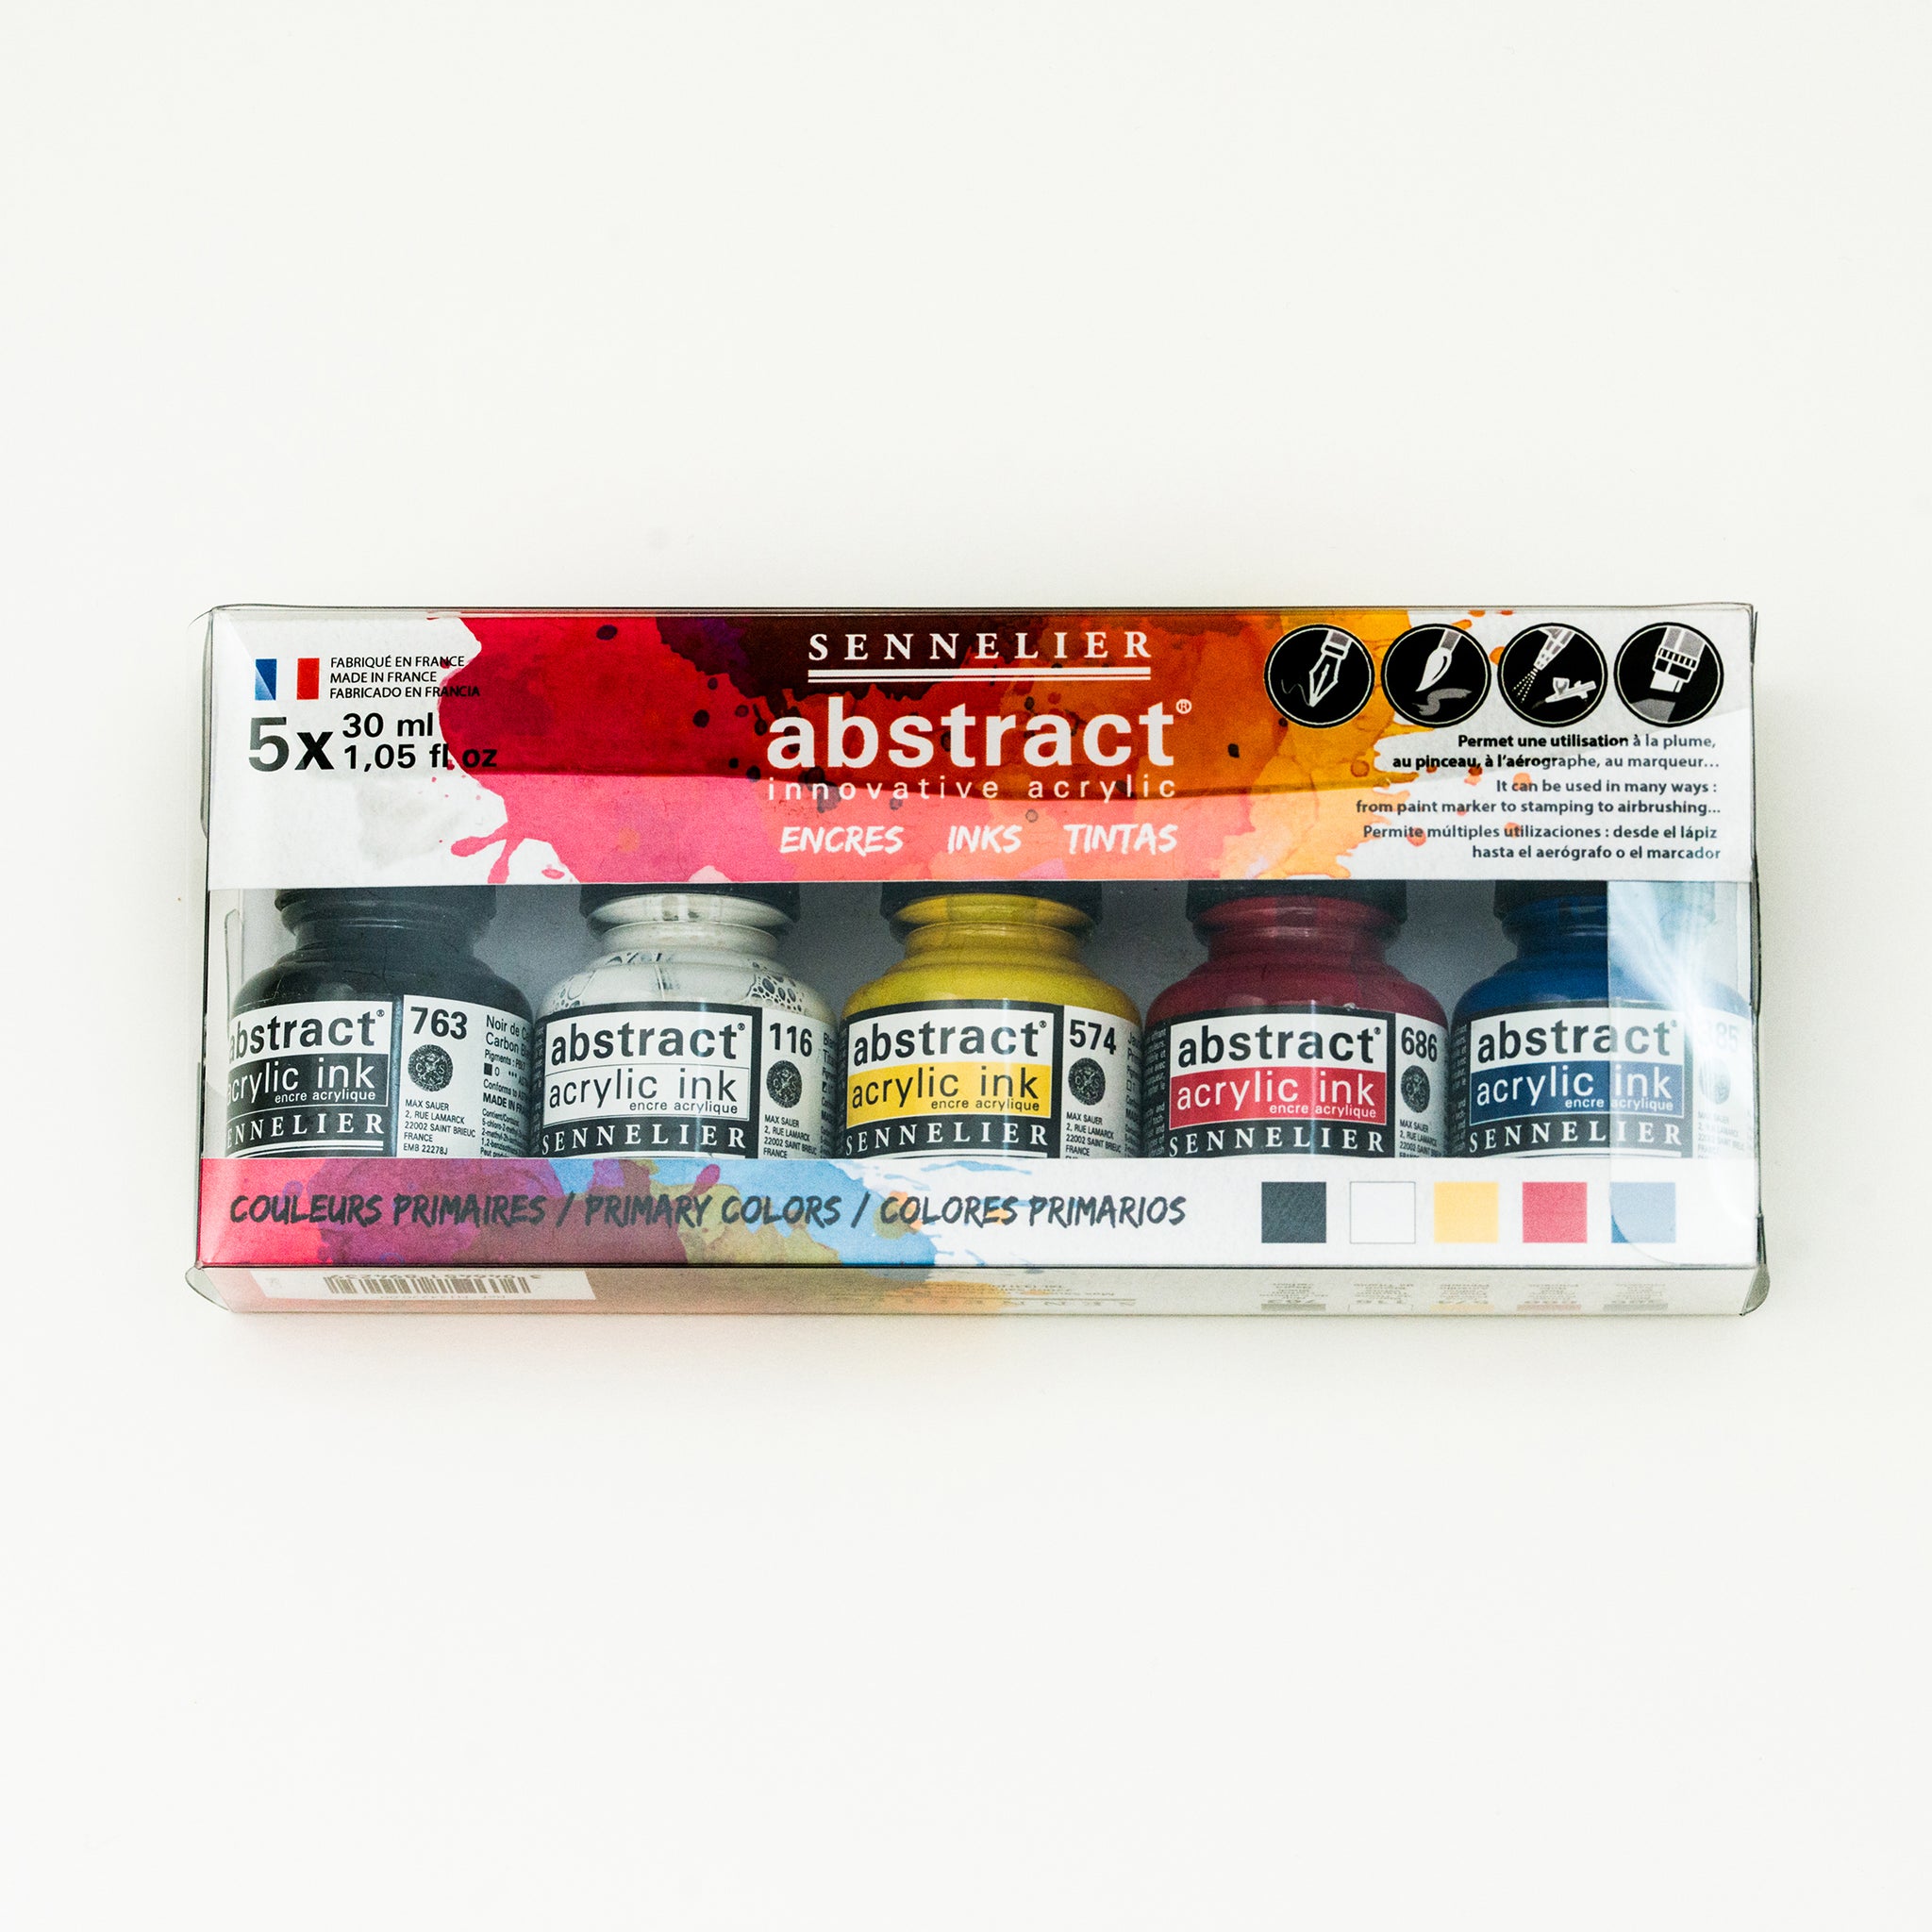 Sennelier Abstract Acrylic Ink Assortment Set With 5 Colours - Melbourne Etching Supplies